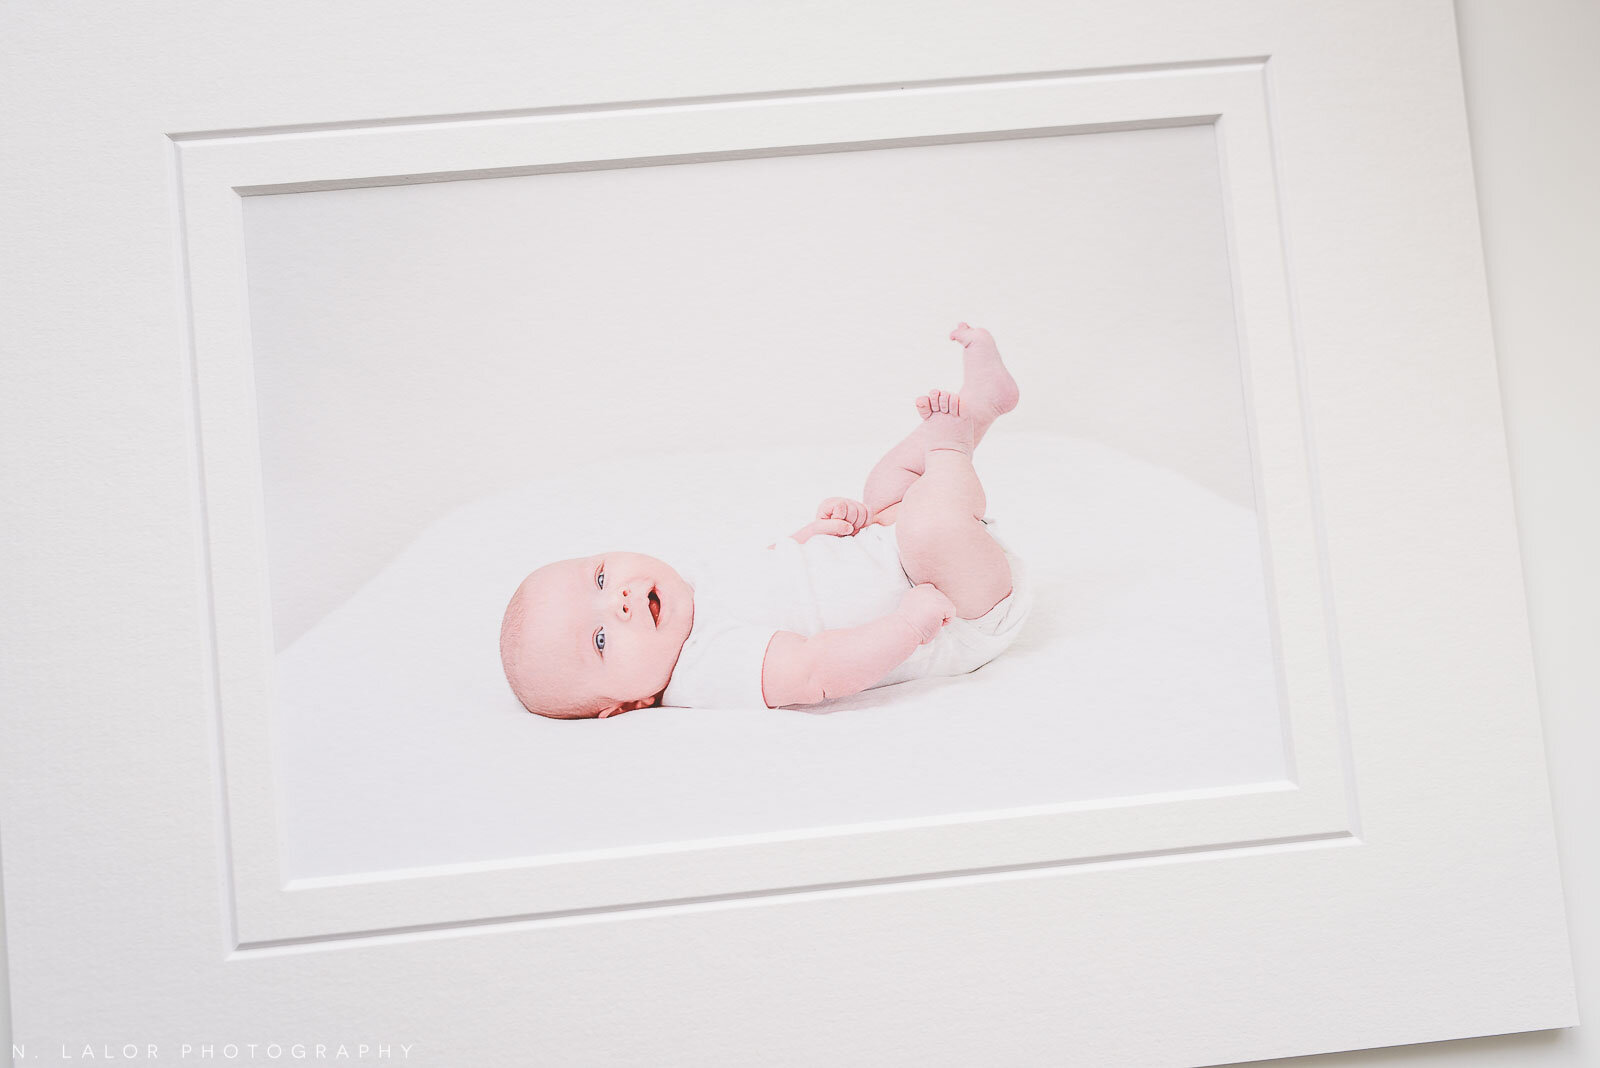 nlalor-photography-2018-twins-baby-photo-session-greenwich-connecticut-6.jpg